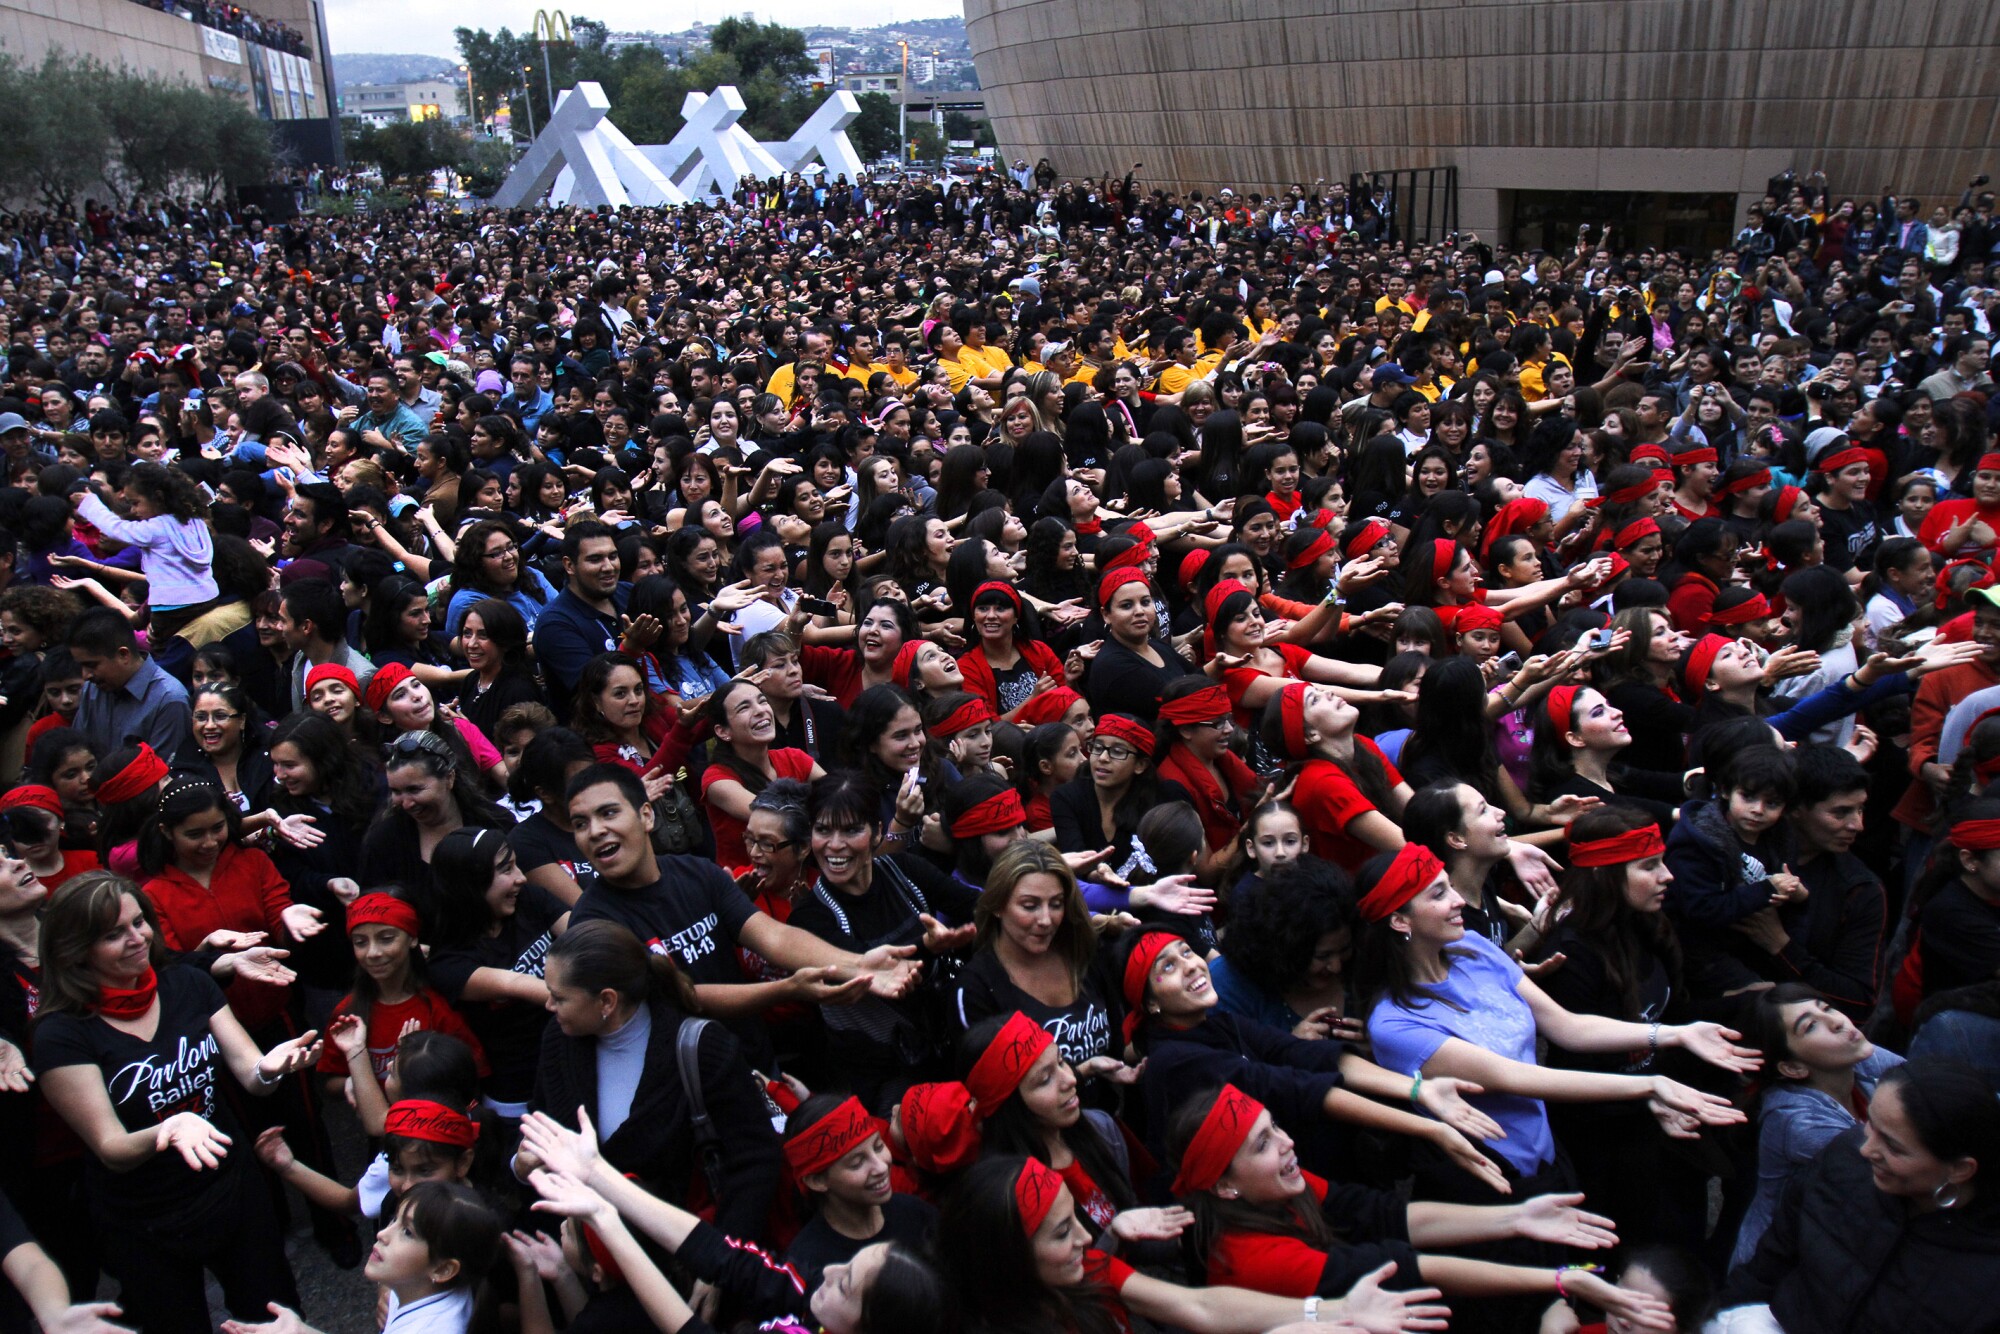  Thousands of people dance to “Pa’ Bailar” in the closing ceremony of Tijuana Innovadora 2010.